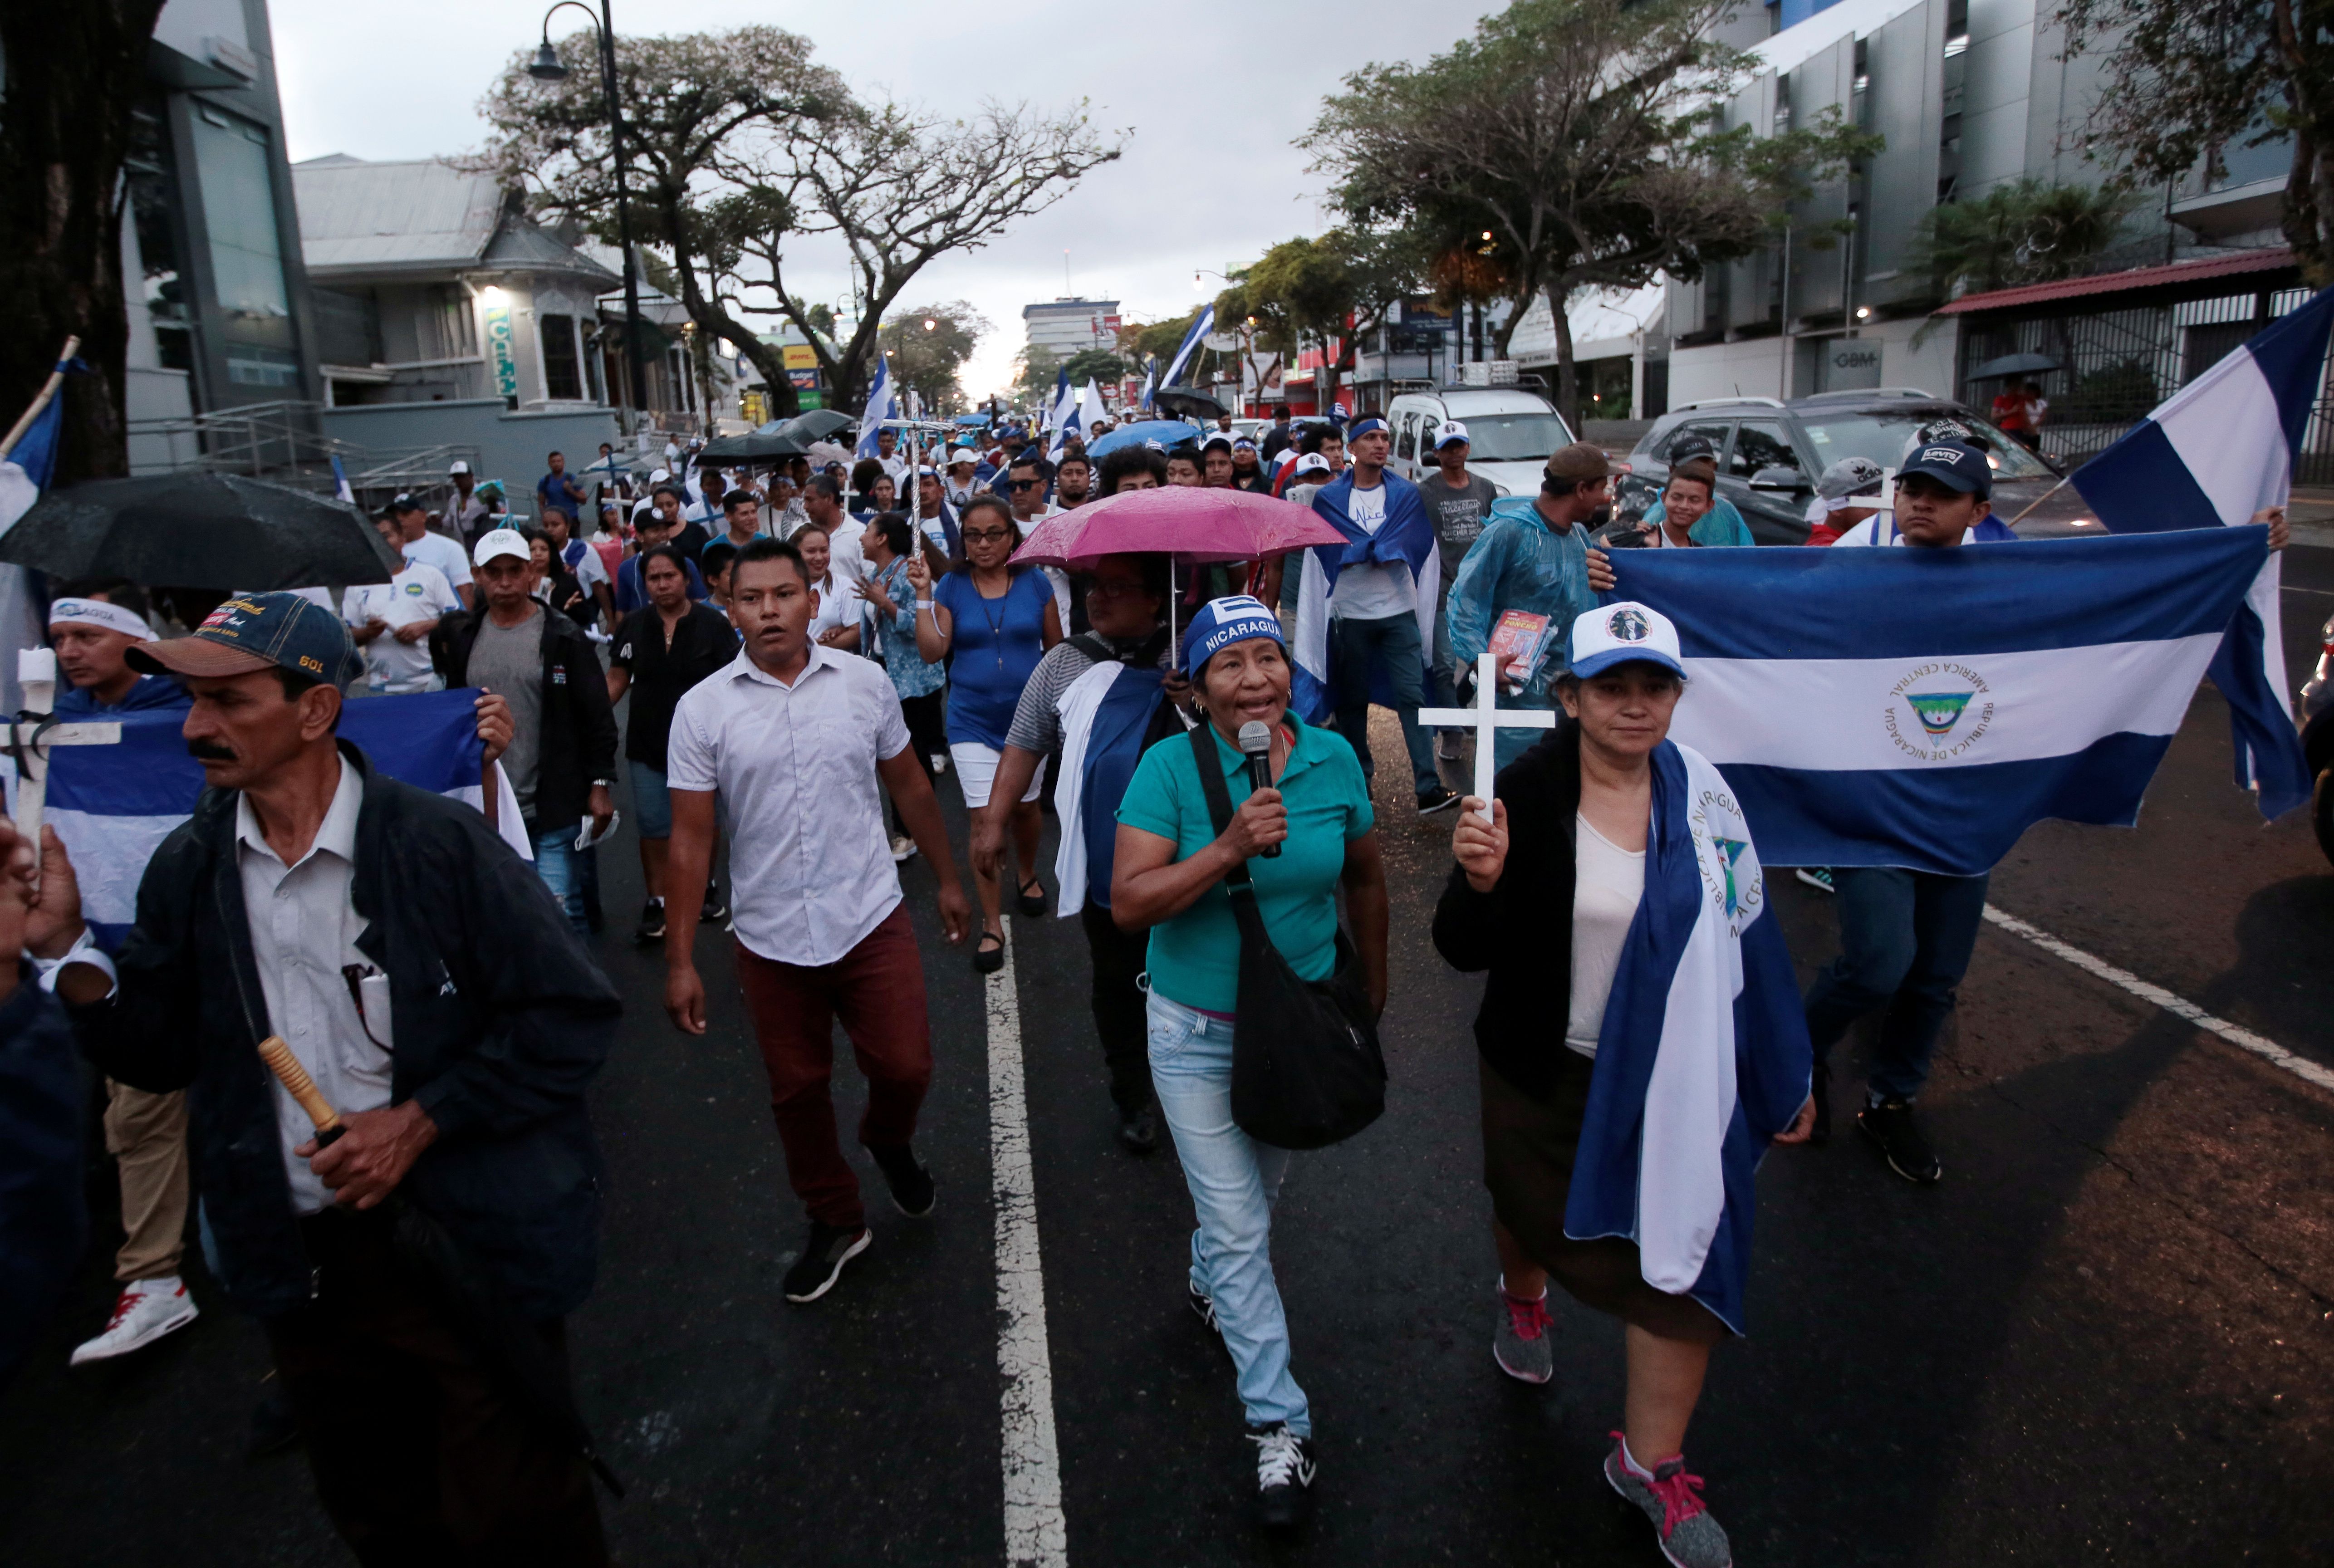 5729969-2019-04-20T014145Z_1127874035_RC12686827A0_RTRMADP_3_COSTARICA-NICARAGUA-PROTEST